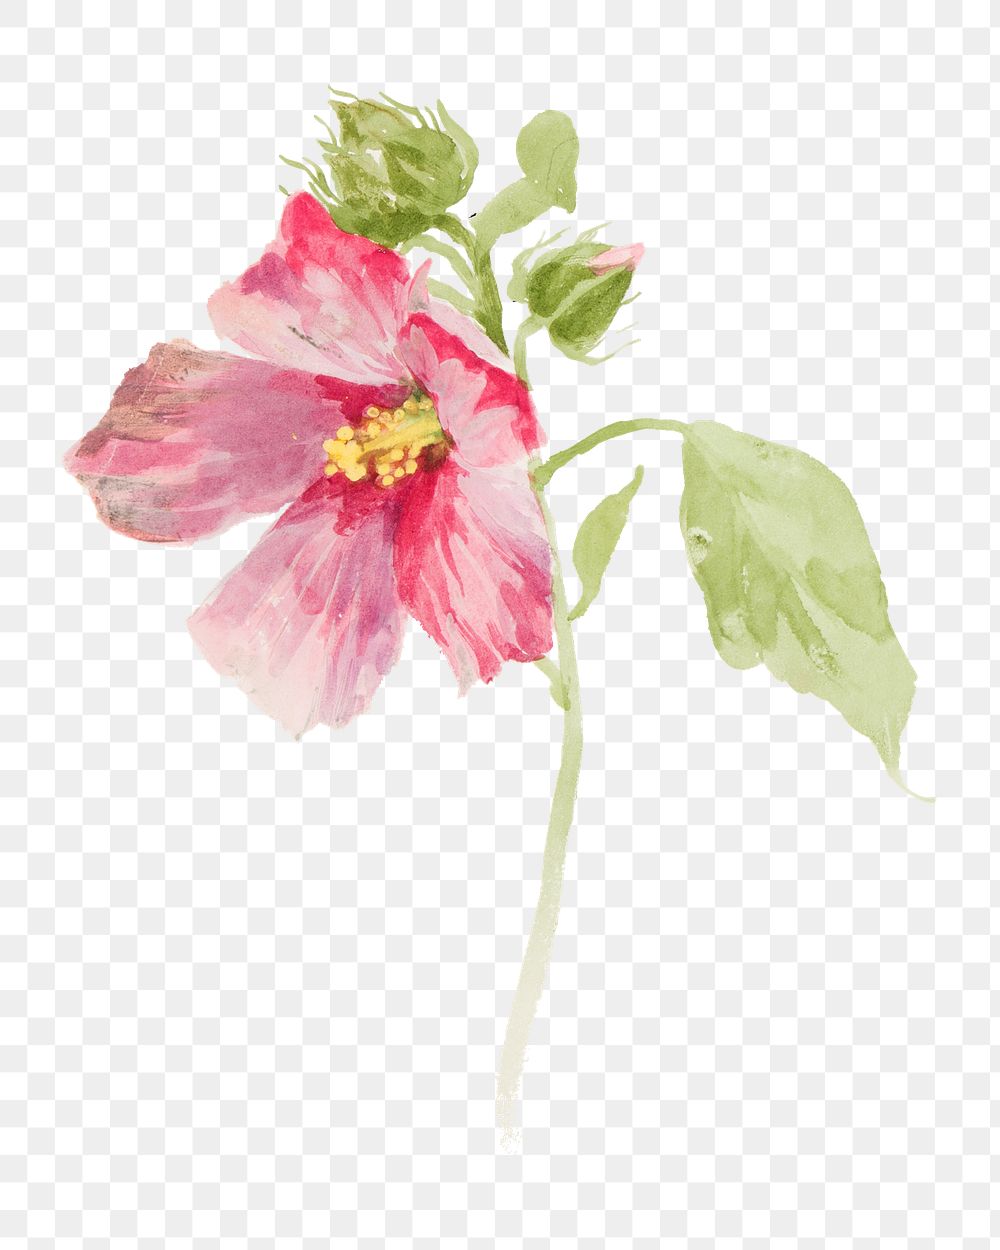 Mallow flower png watercolor illustration element, transparent background. Remixed from vintage artwork by rawpixel.